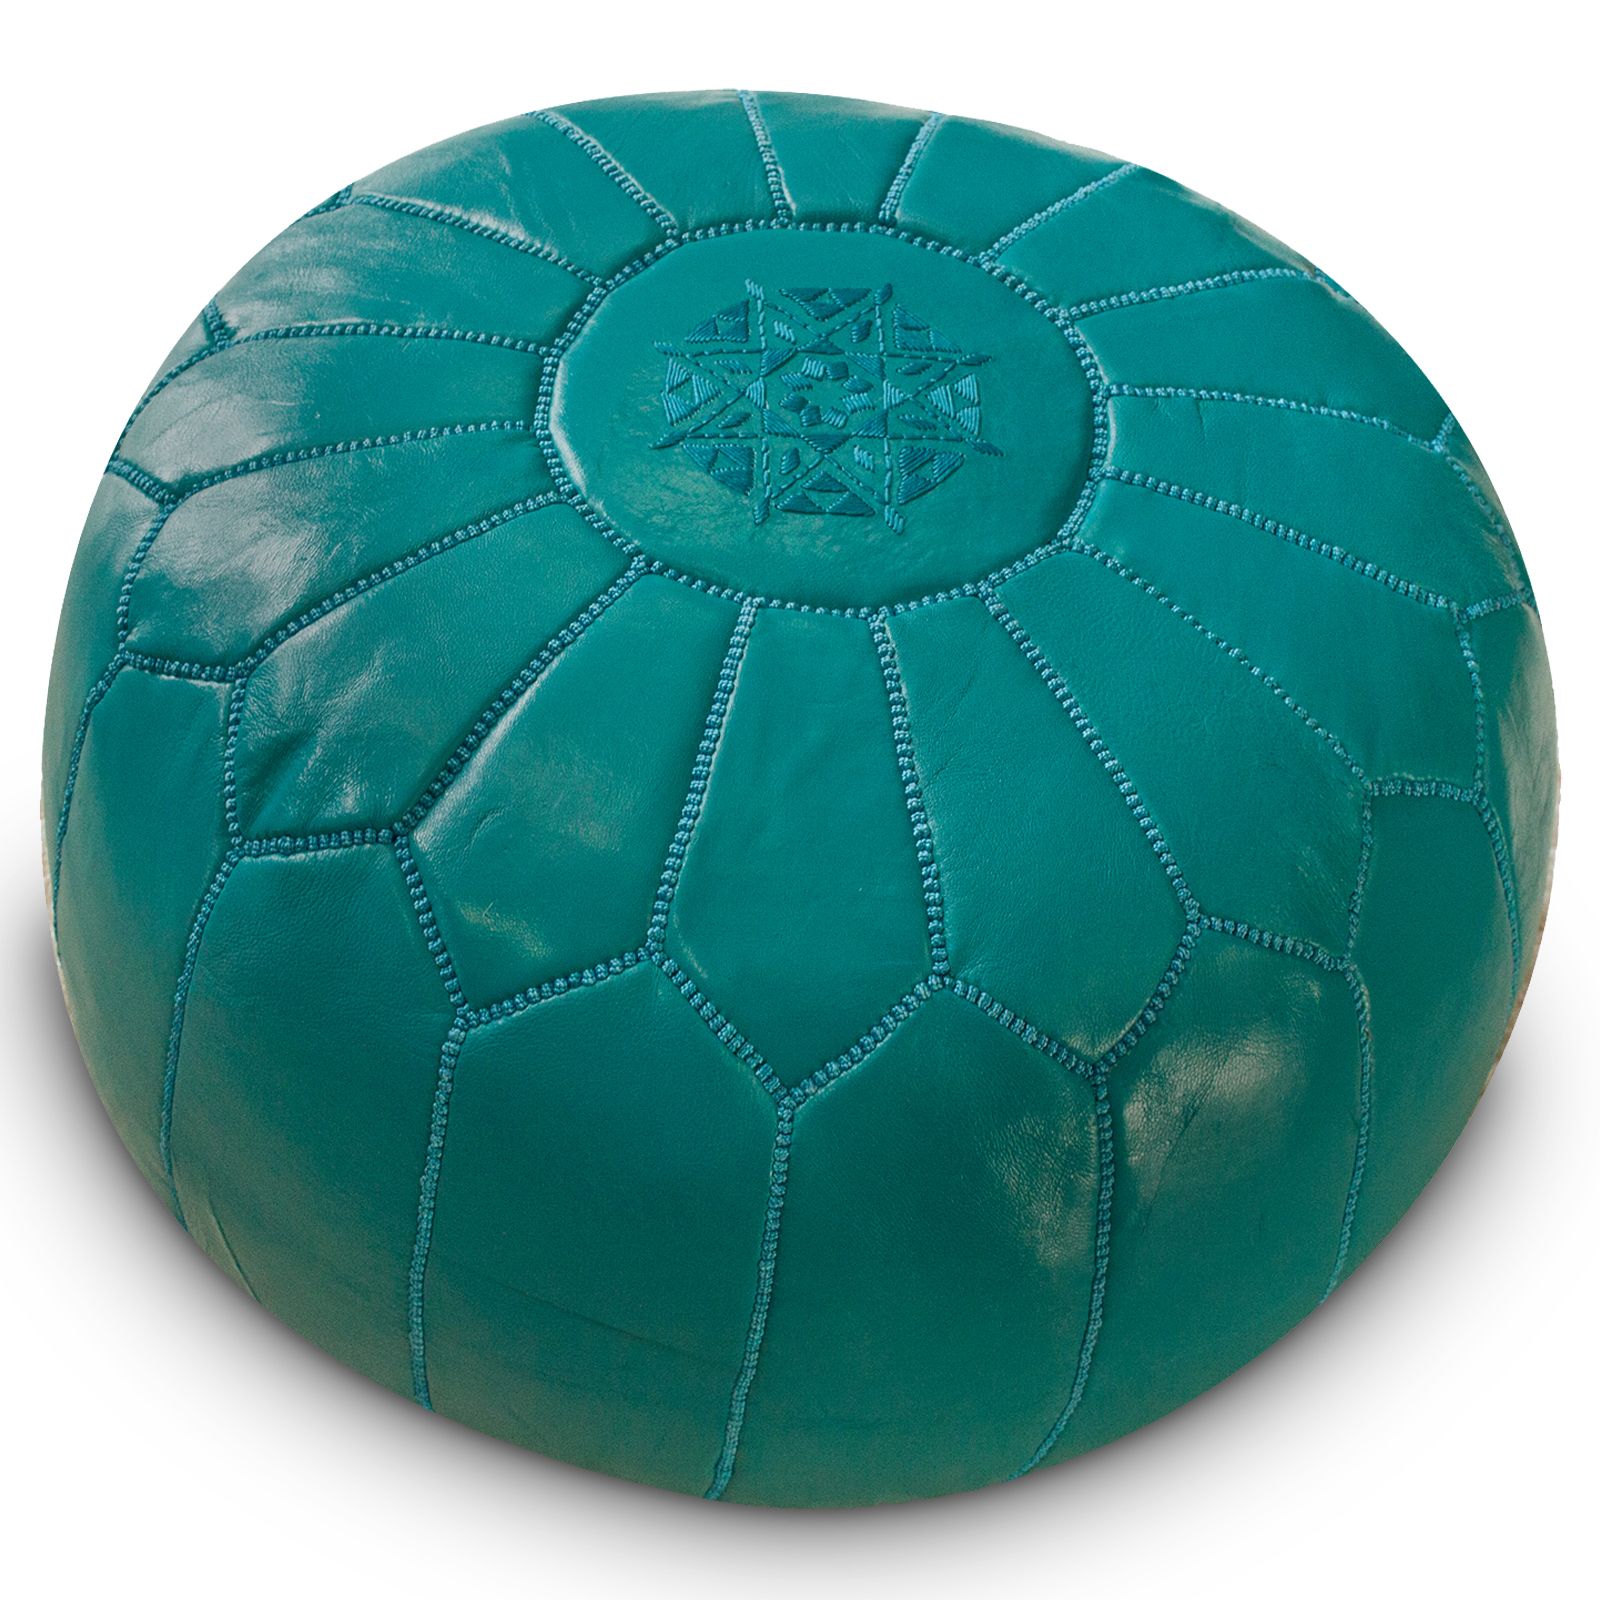 Moroccan Ottoman – Turquoise At Hayneedle Throughout Widely Used Textured Aqua Round Pouf Ottomans (View 6 of 10)